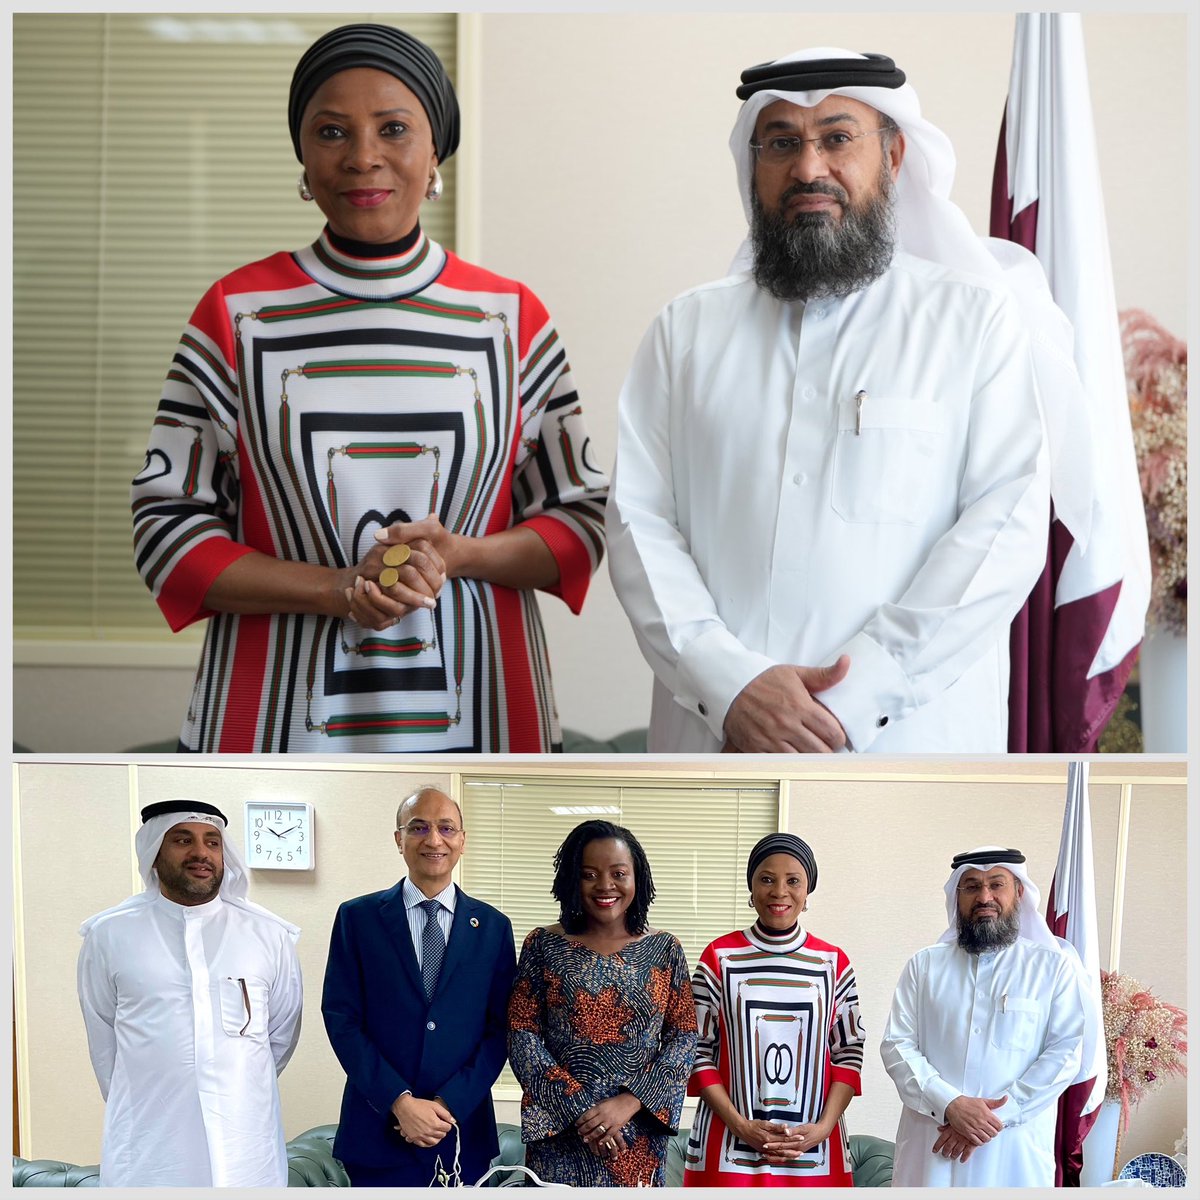 Pleased to meet w/ HE Dr Masoud Jarallah Al-Marri, Chairman of the Executive Council of the Islamic Organization for Food Security @IOFS_KZ to discuss how we could improve #foodsystems for mutually beneficial partnerships between African countries & #Qatar +rest of Middle East